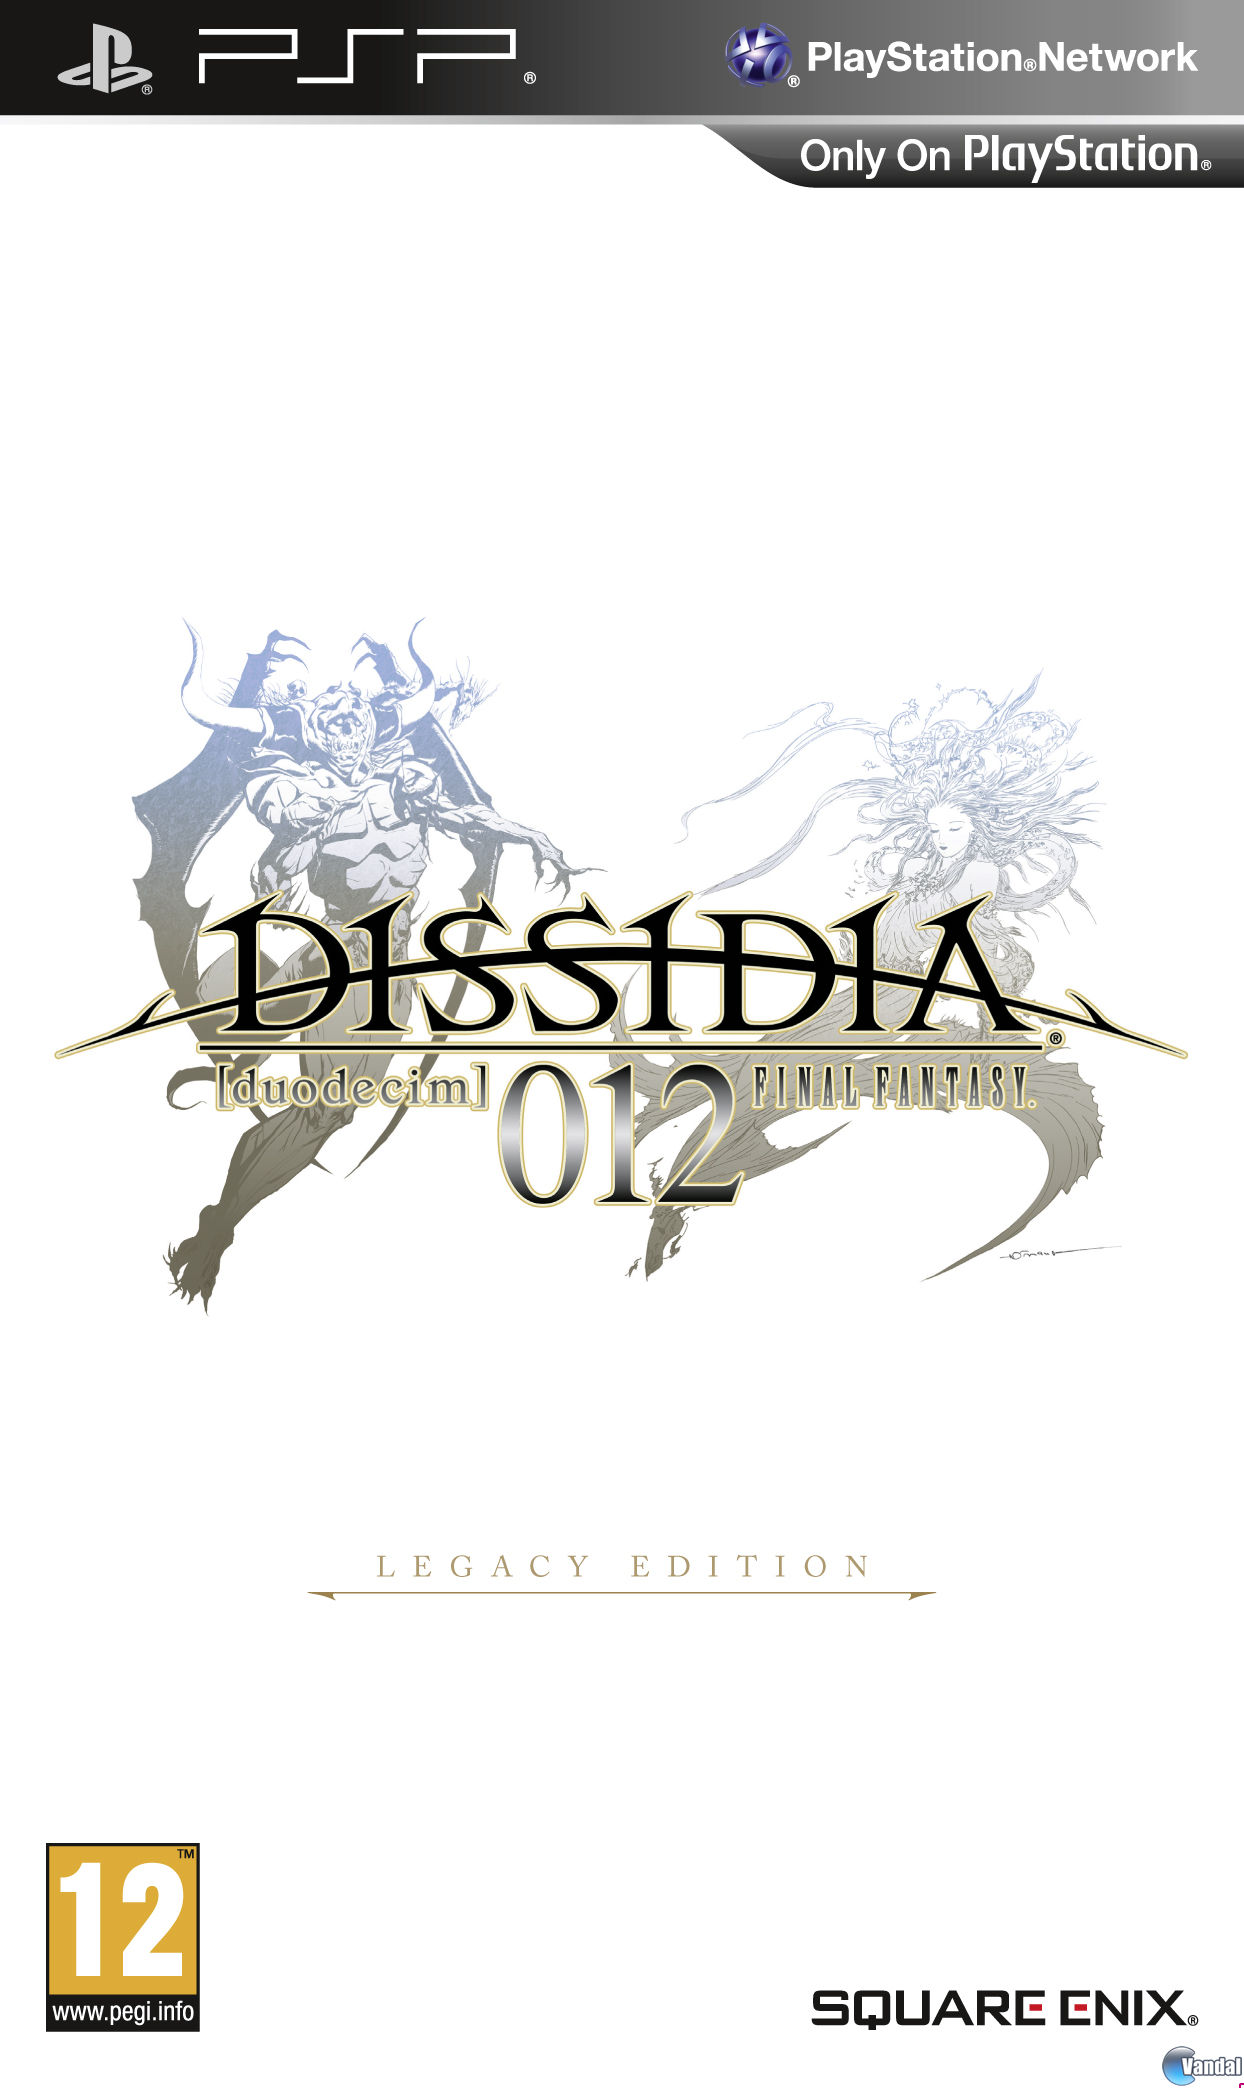 Translation Patch For Dissidia